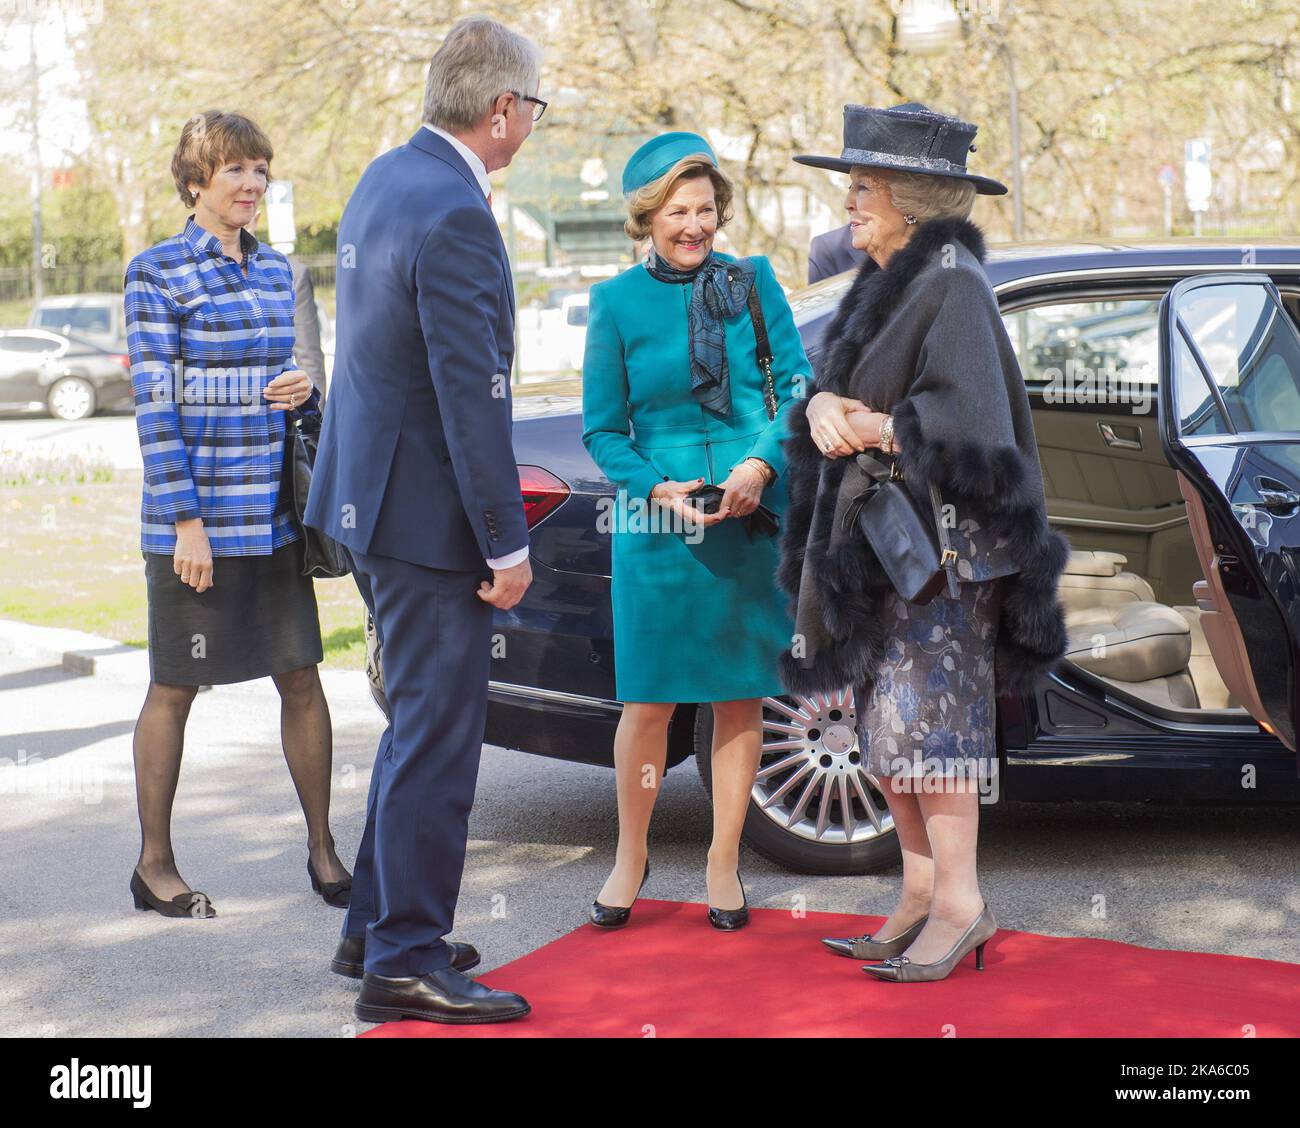 Oslo May 09, 2015. Queen Sonja of Norway and Princess Beatrix of the Netherlands, escorted by Oslo Mayor Fabian Stang, attend the opening of an exhibition pairing the works of artists Edvard Munch and Vincent van Gogh at the Munch Museum in Oslo. Phot by Fredrik Varfjell, NTB scanpix  Stock Photo